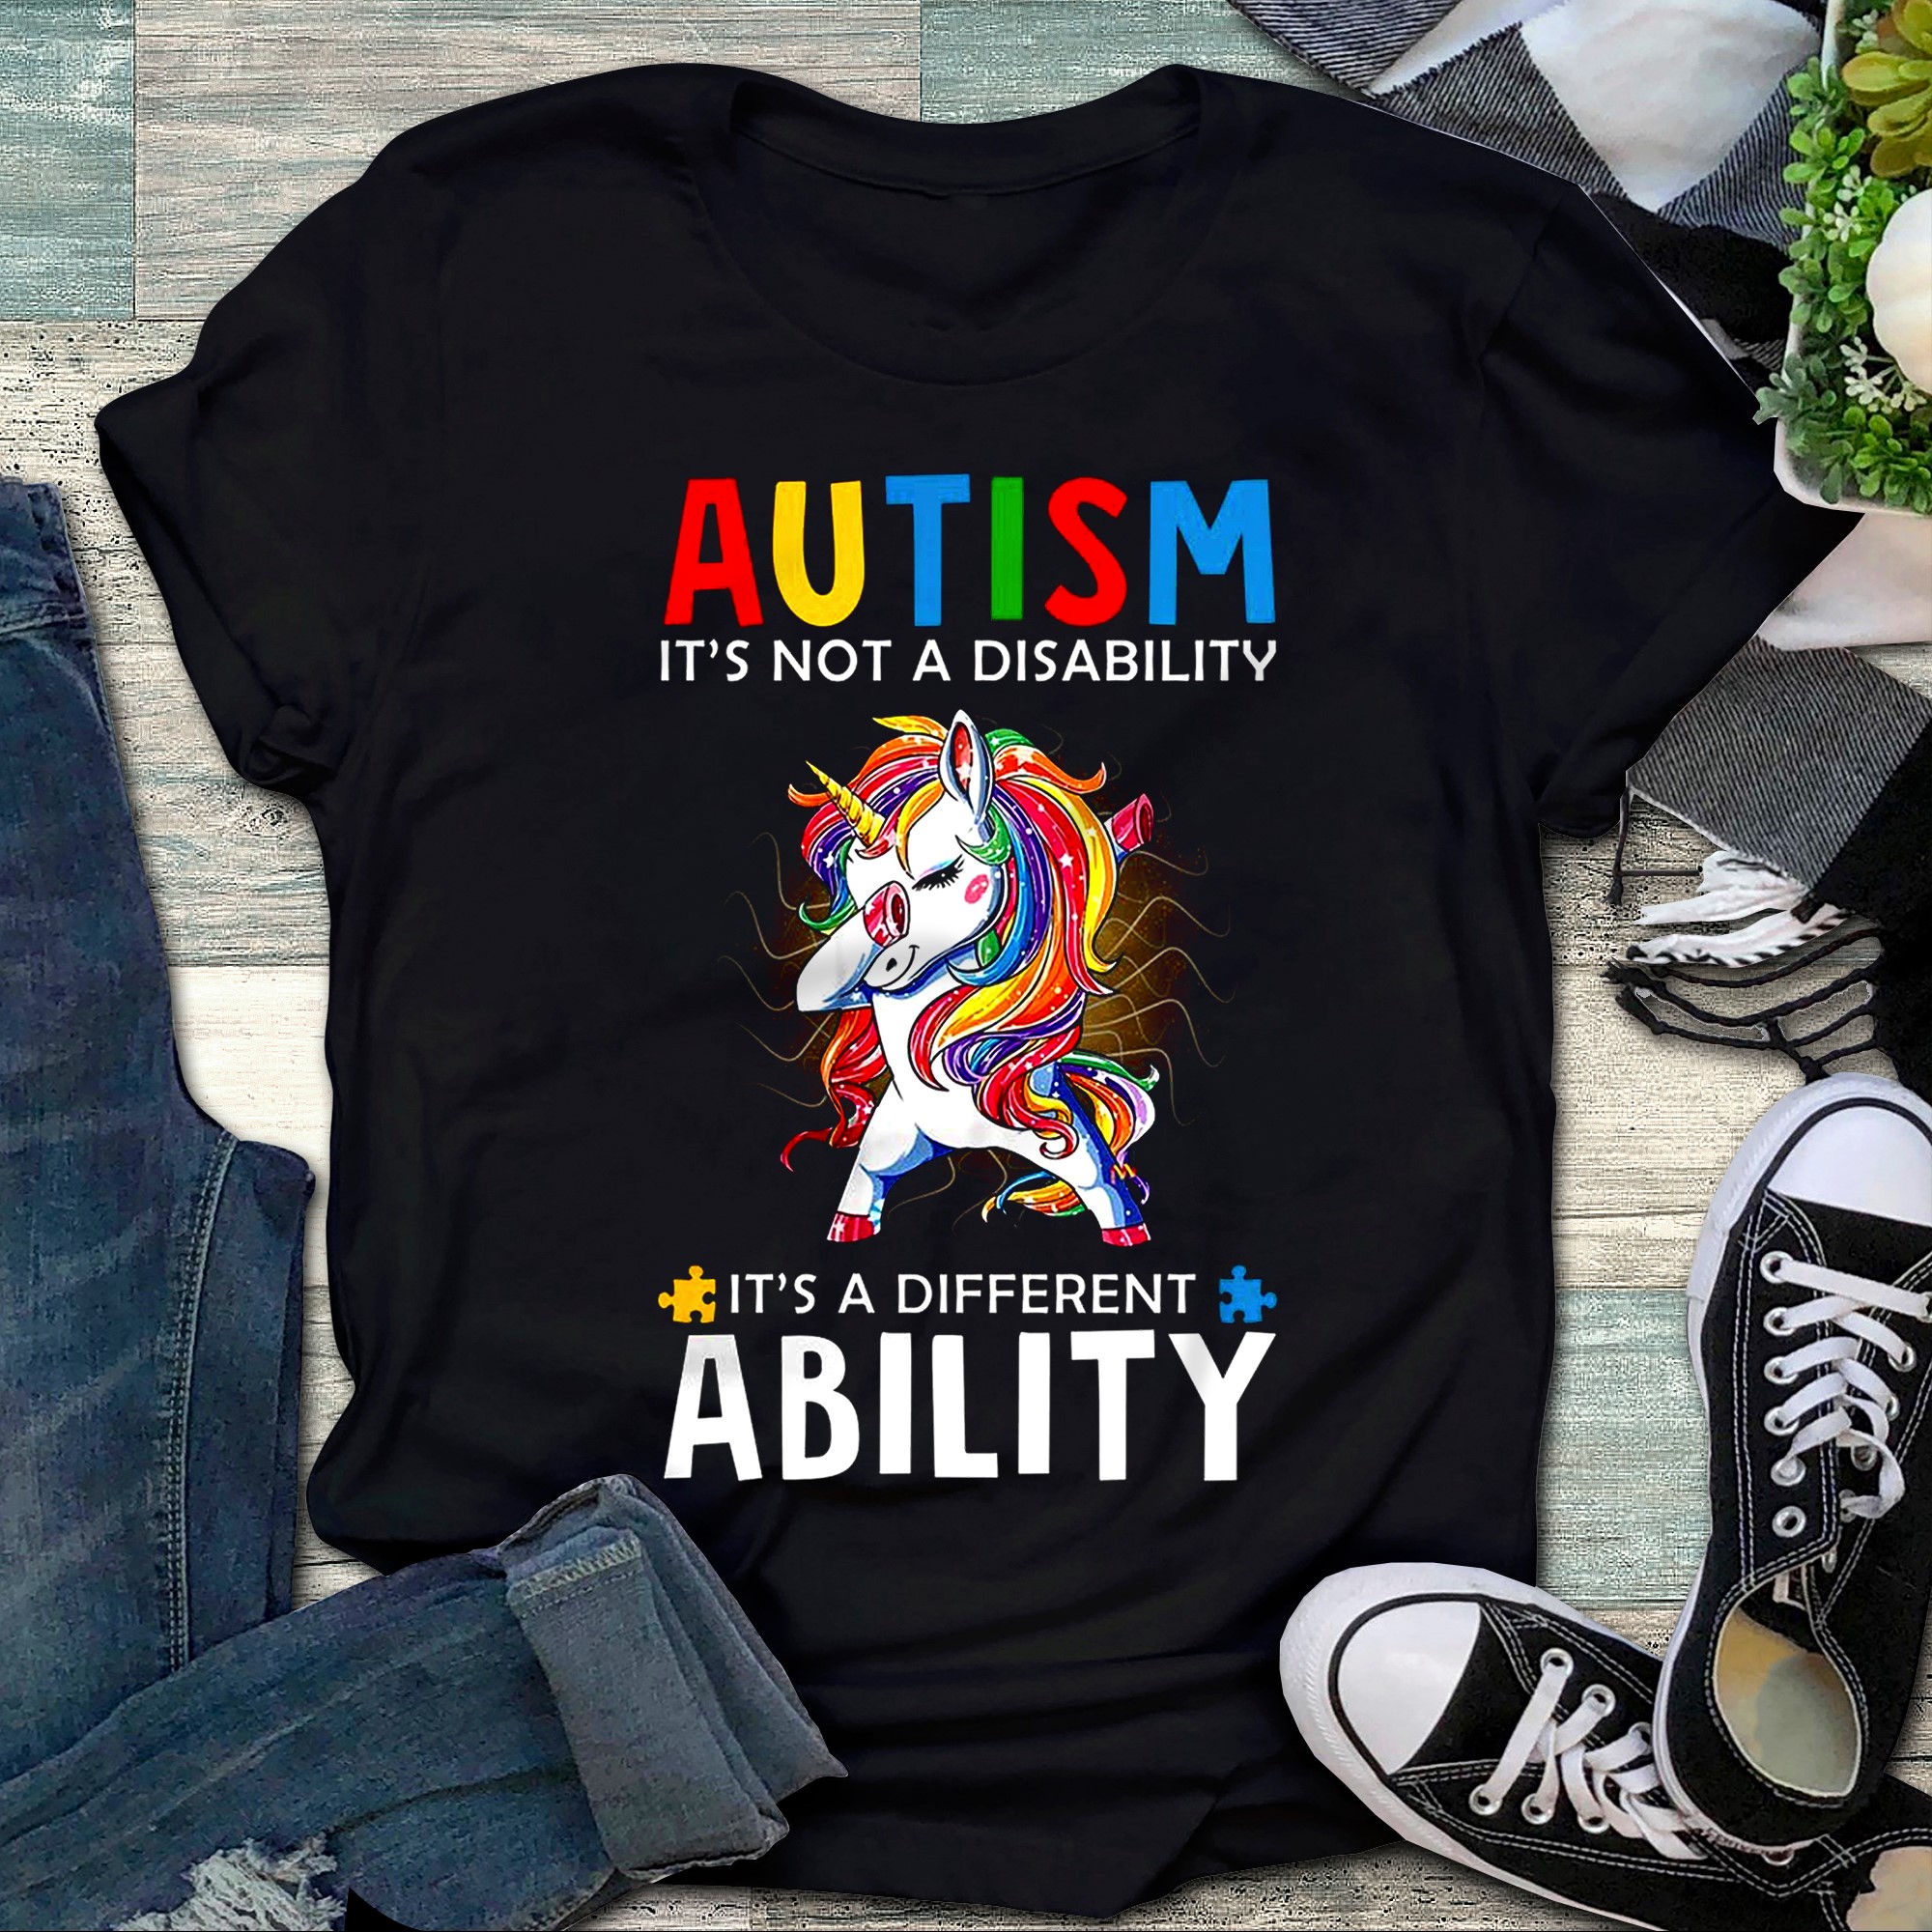 Autism it's not a disbility it's a different ability - Unicorn and autism awareness